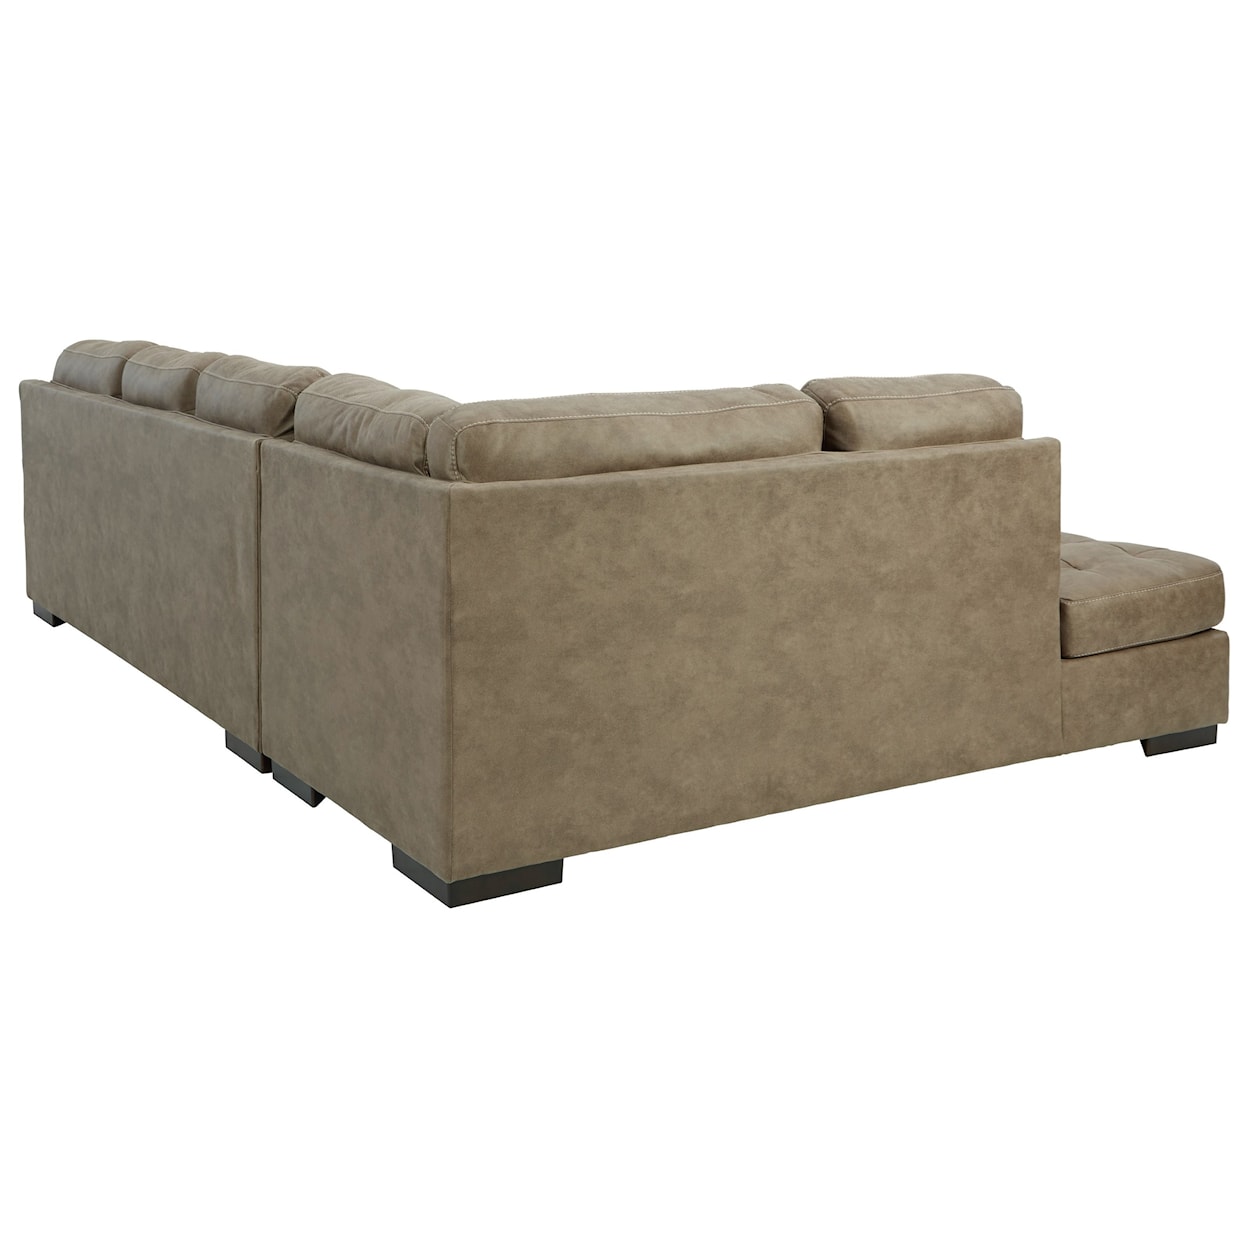 Signature Design by Ashley Maderla 2-Piece Sectional with Chaise